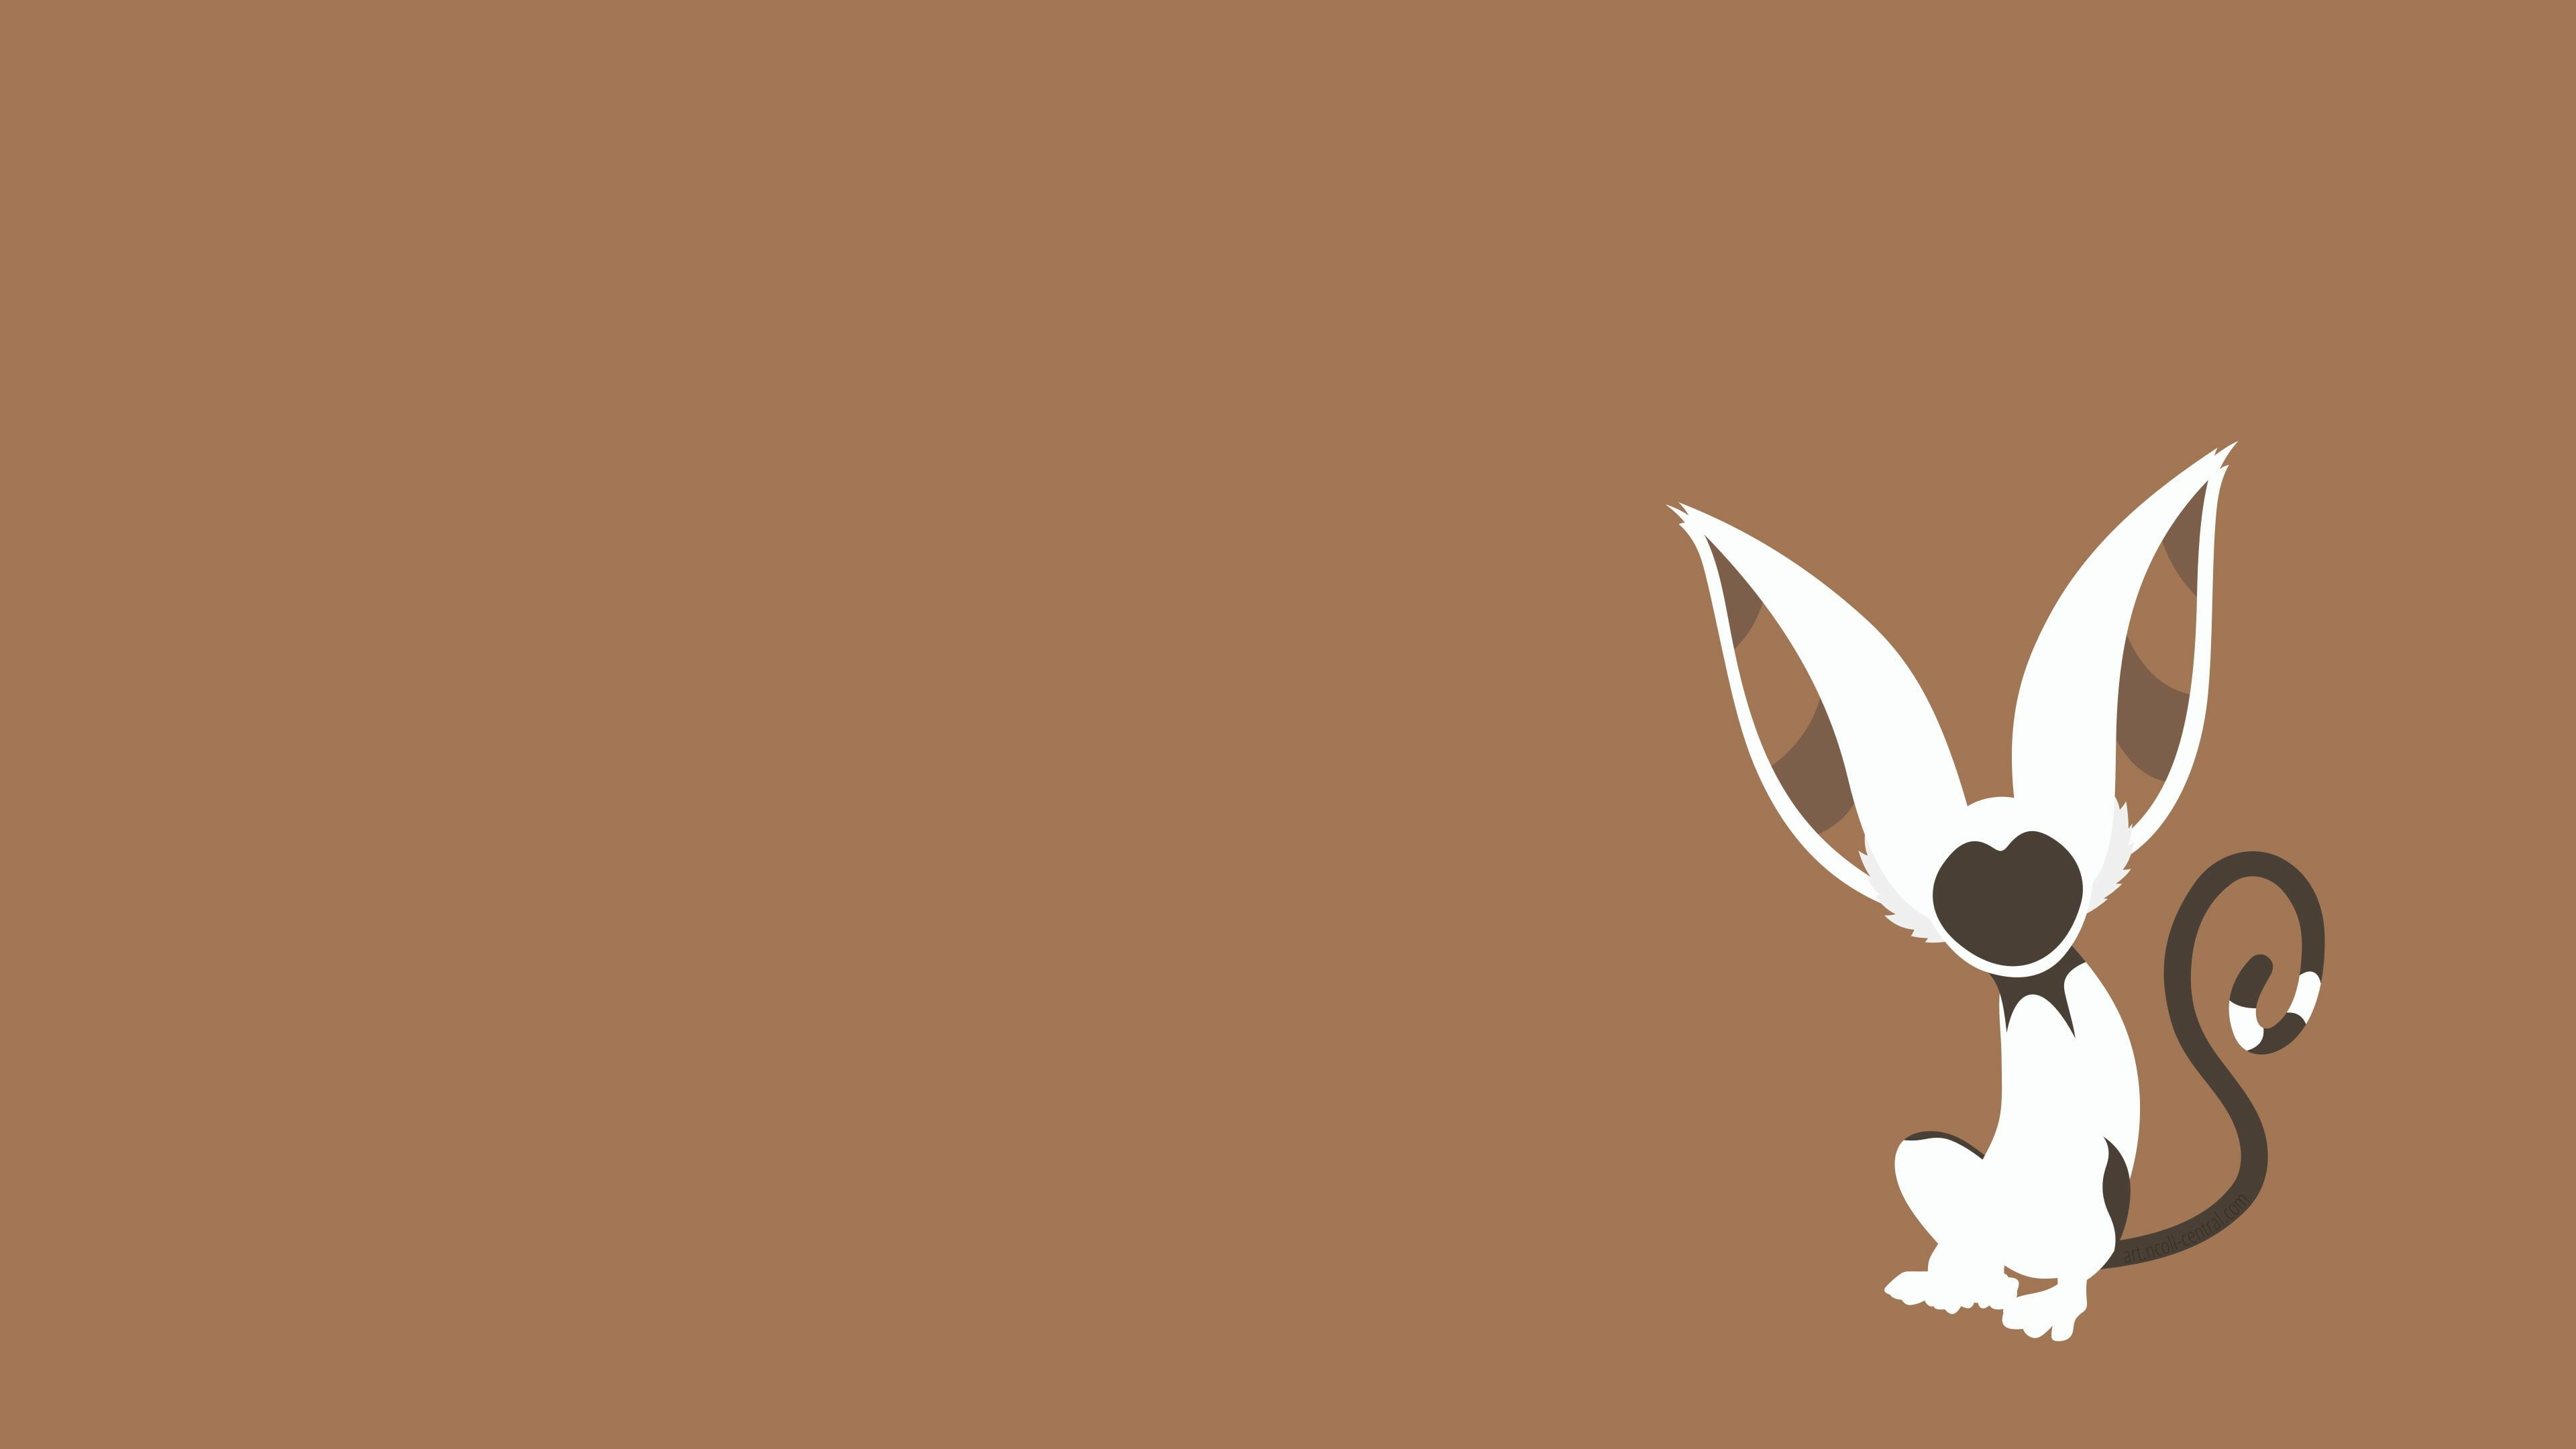 Avatar: The Last Airbender: Momo, a winged lemur and a loyal companion of Aang, Anime. 3840x2160 4K Wallpaper.